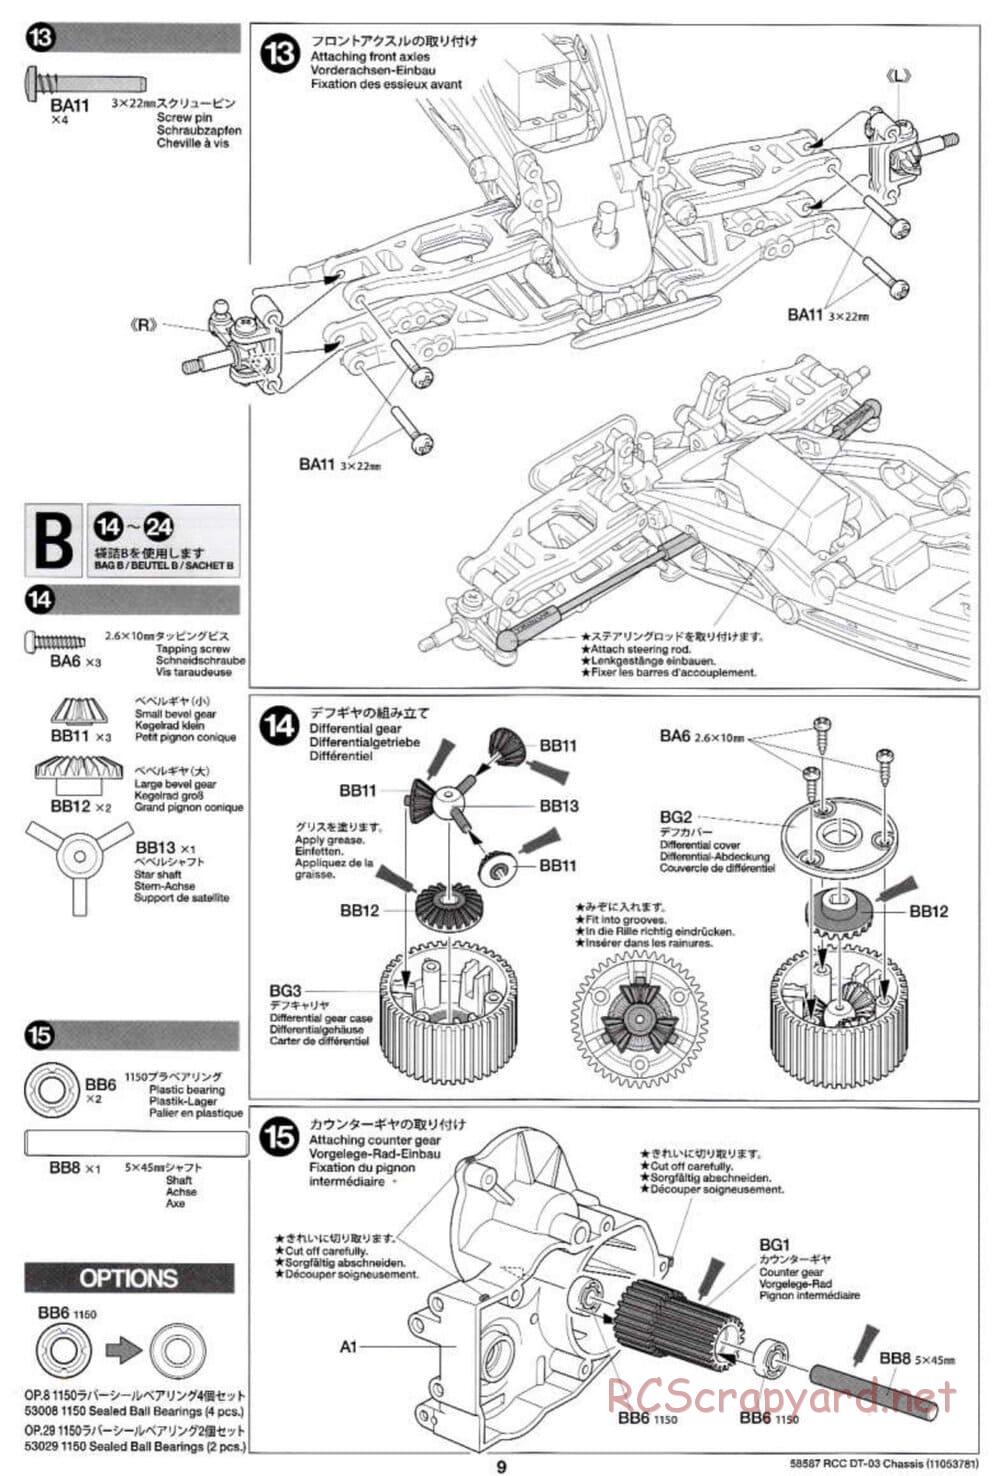 Tamiya - Neo Fighter Buggy Chassis - Manual - Page 9